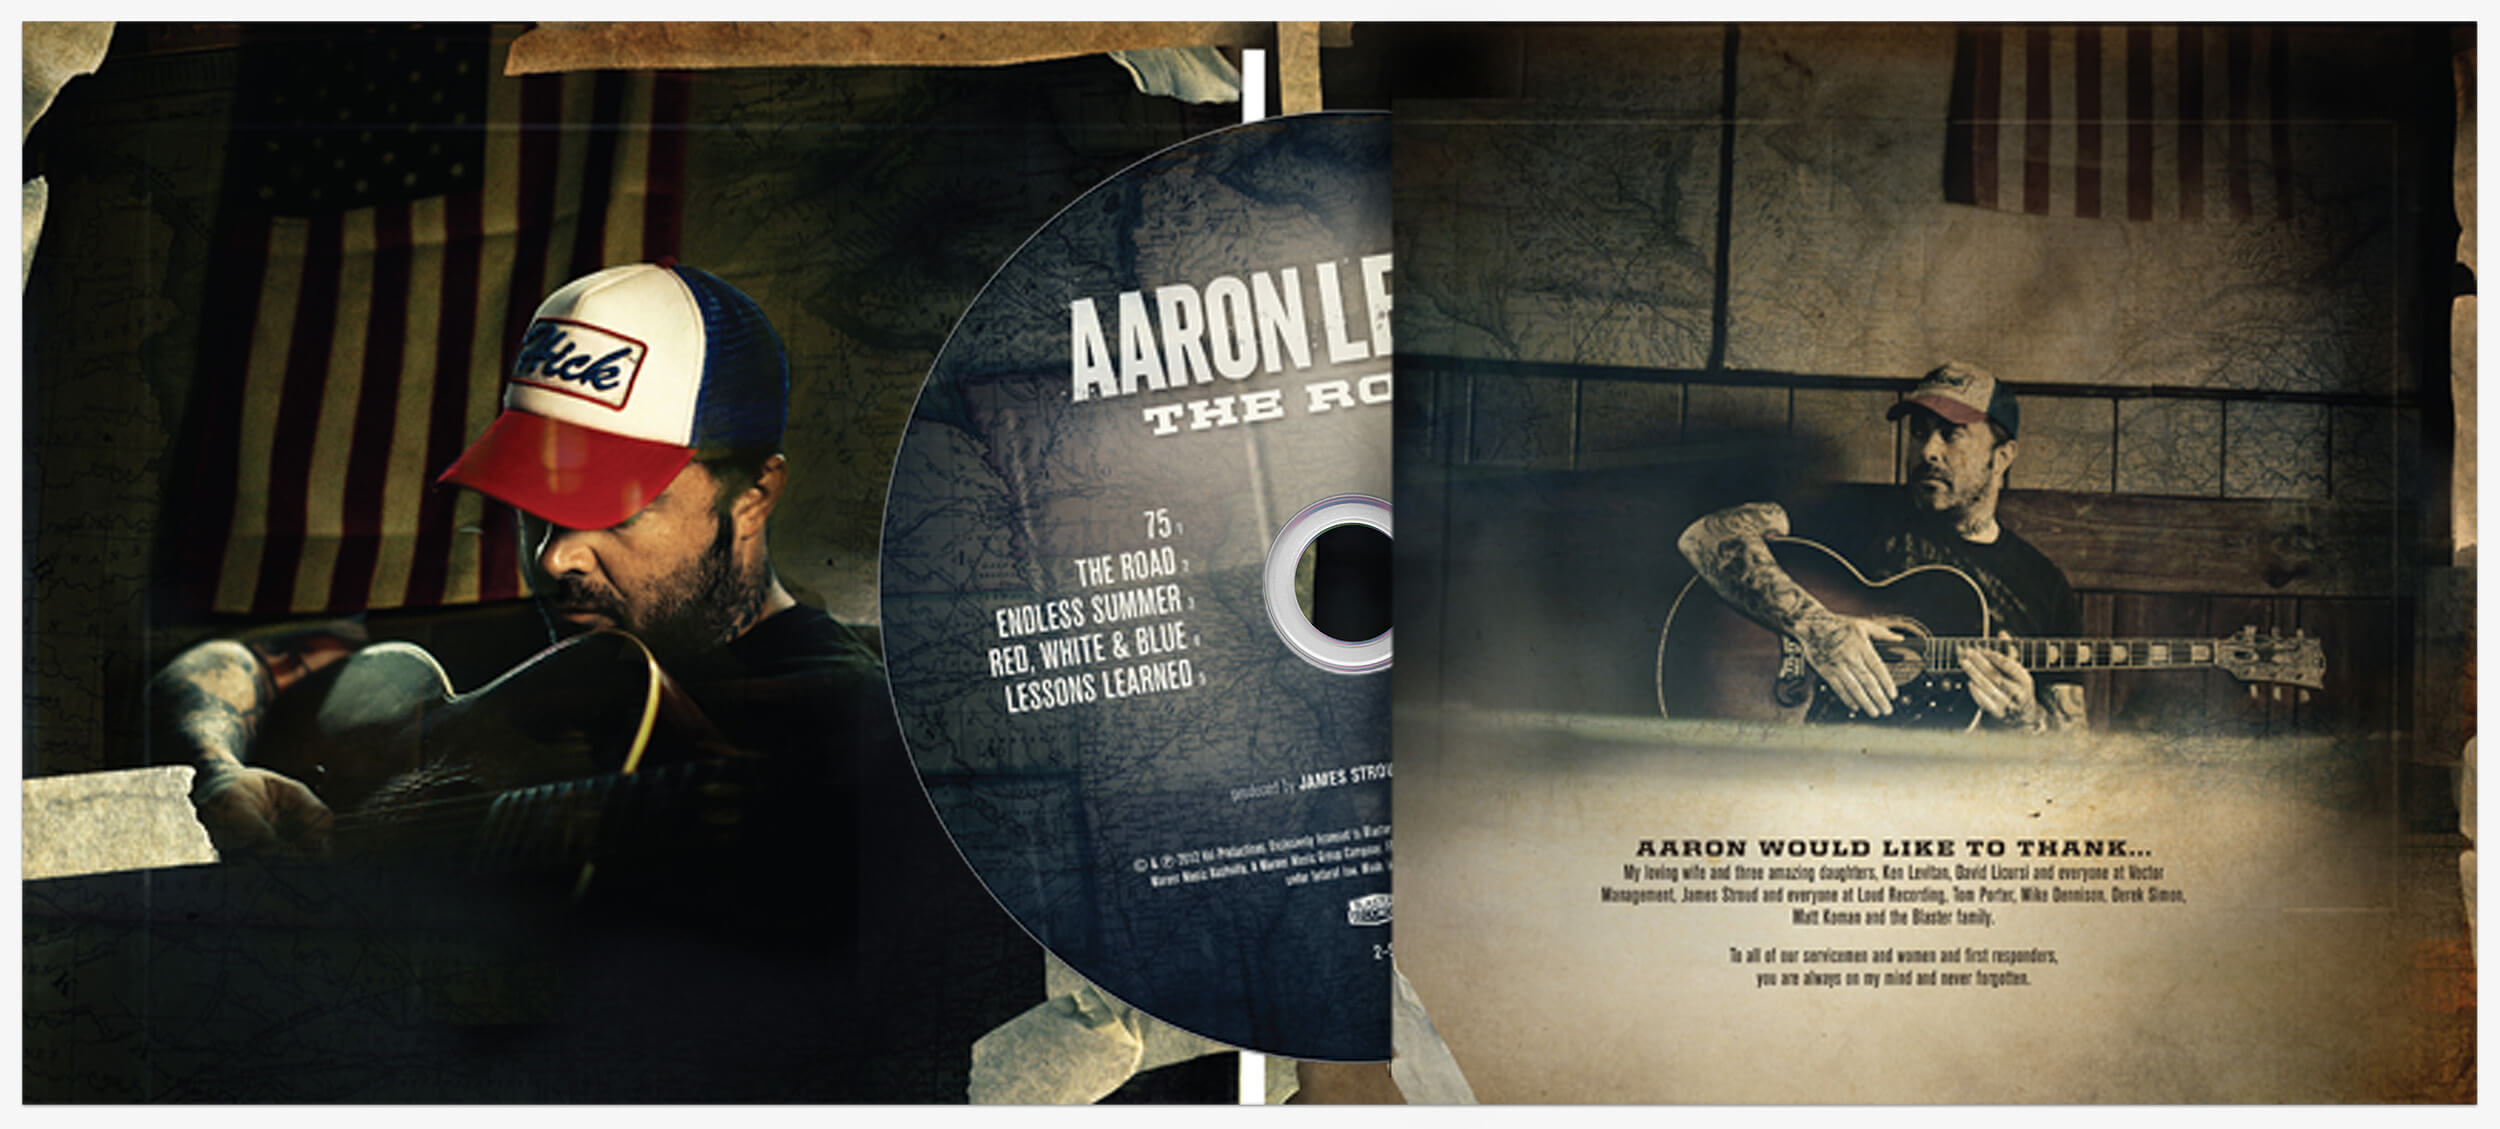 Inside spread and disc CD packaging design for Aaron Lewis The Road